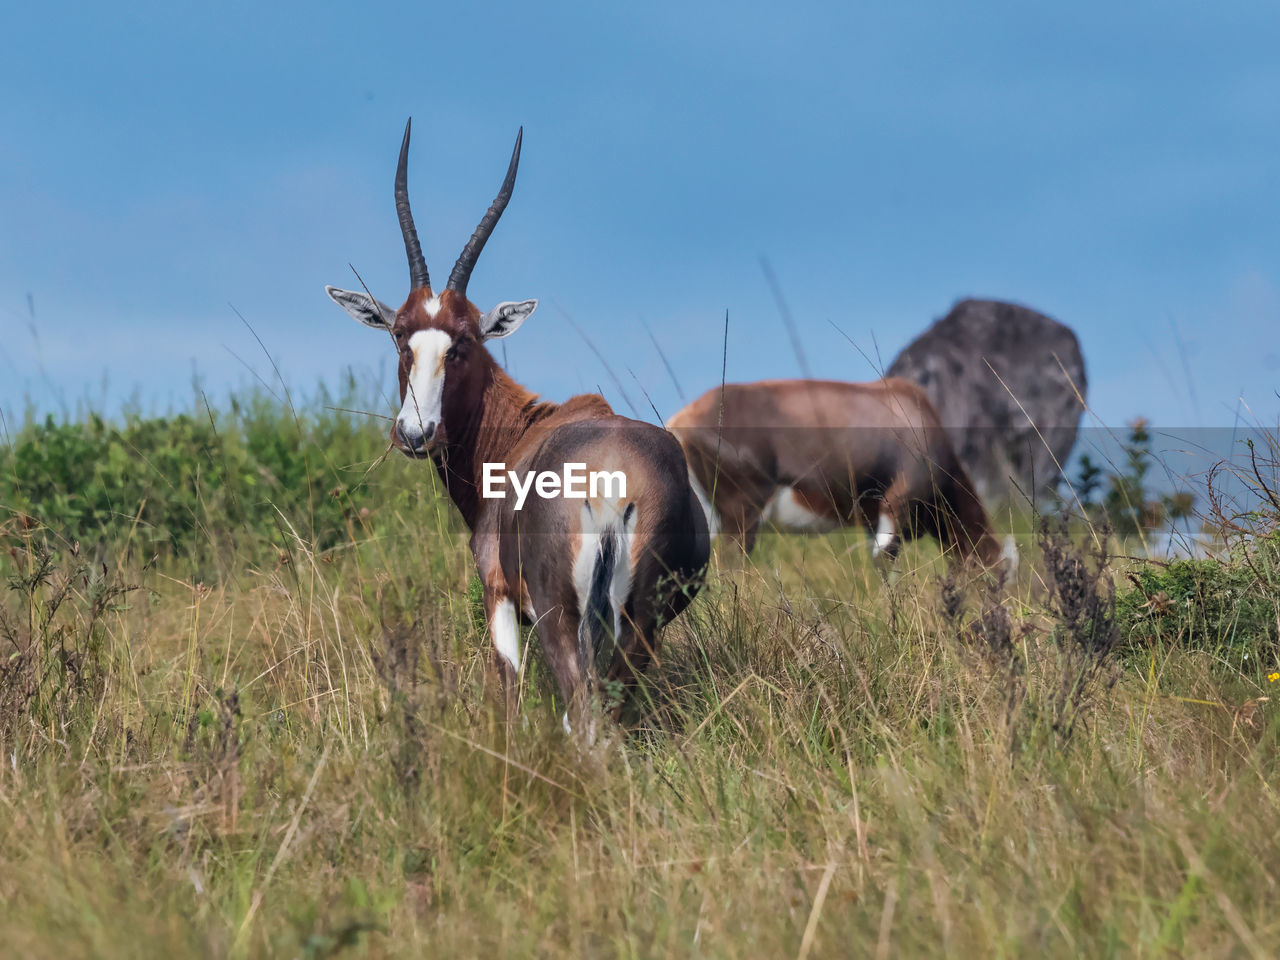 A blesbok looking at the camera while another out of focus one grazes behind